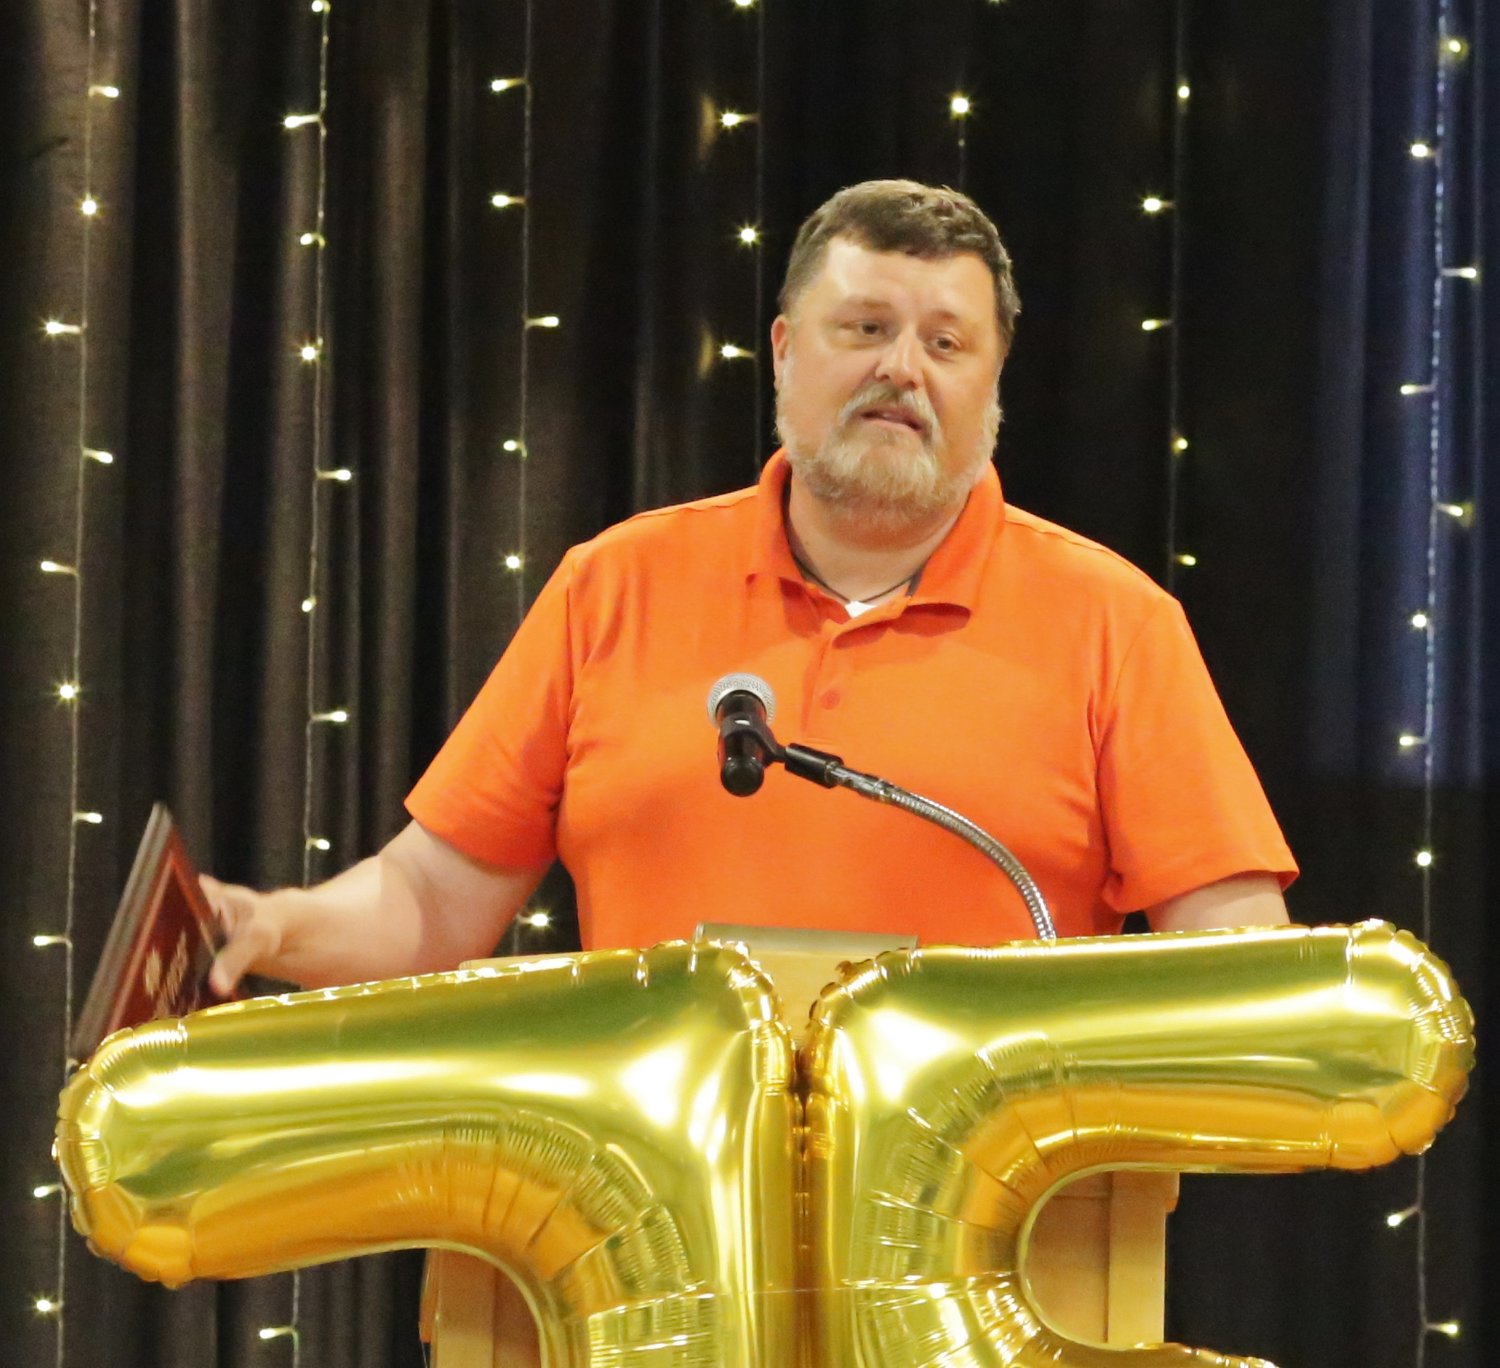 Humanitarian of the Year Robbie Ballard, who serves on the Mineola School Board, stepped up when the high school lost its welding teacher mid-term.